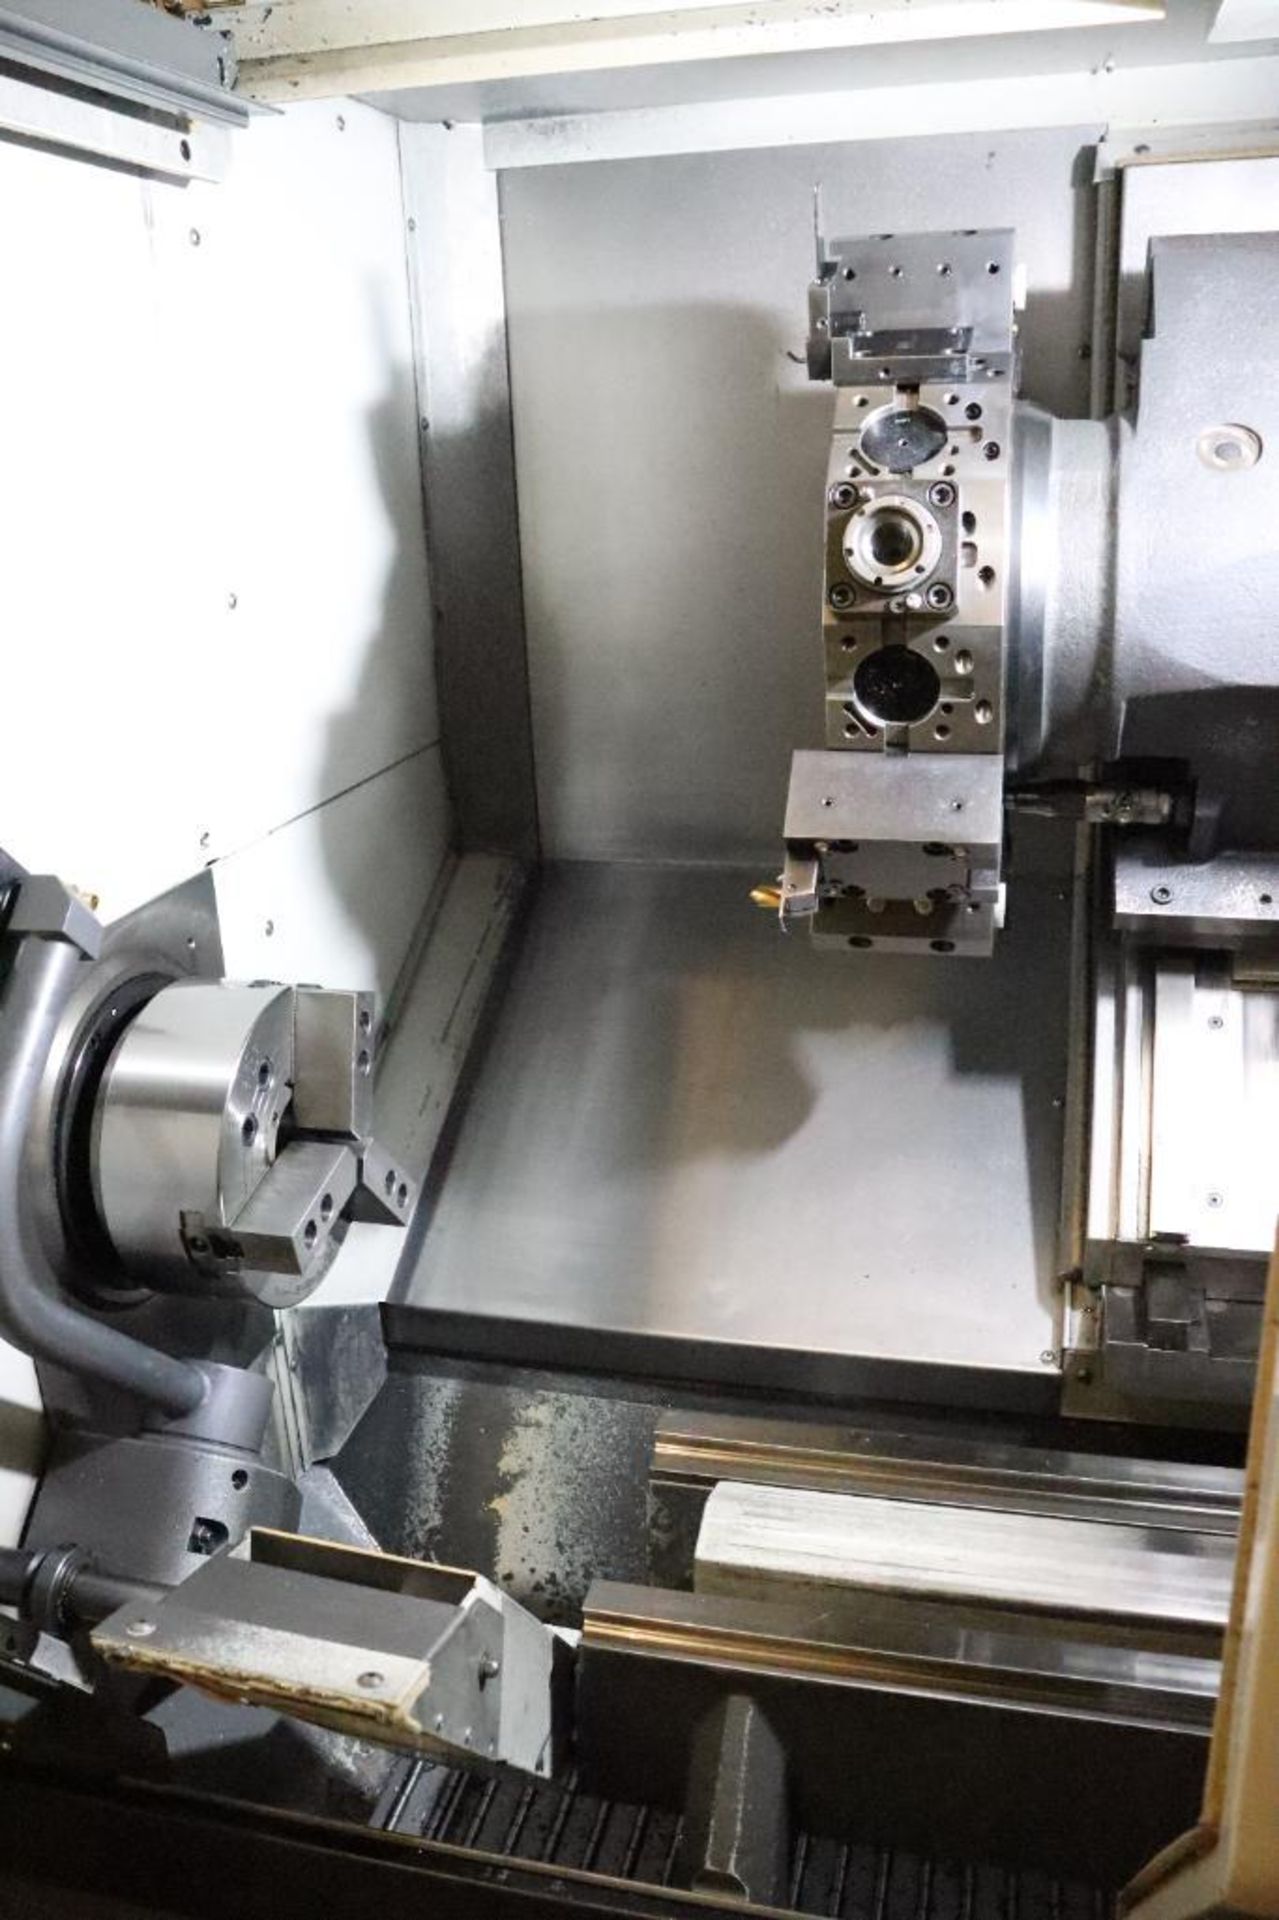 2021 Haas DS-30Y Dual Spindle Turning Center w/ bar feeder, Live tooling, Low hours! - Image 6 of 22